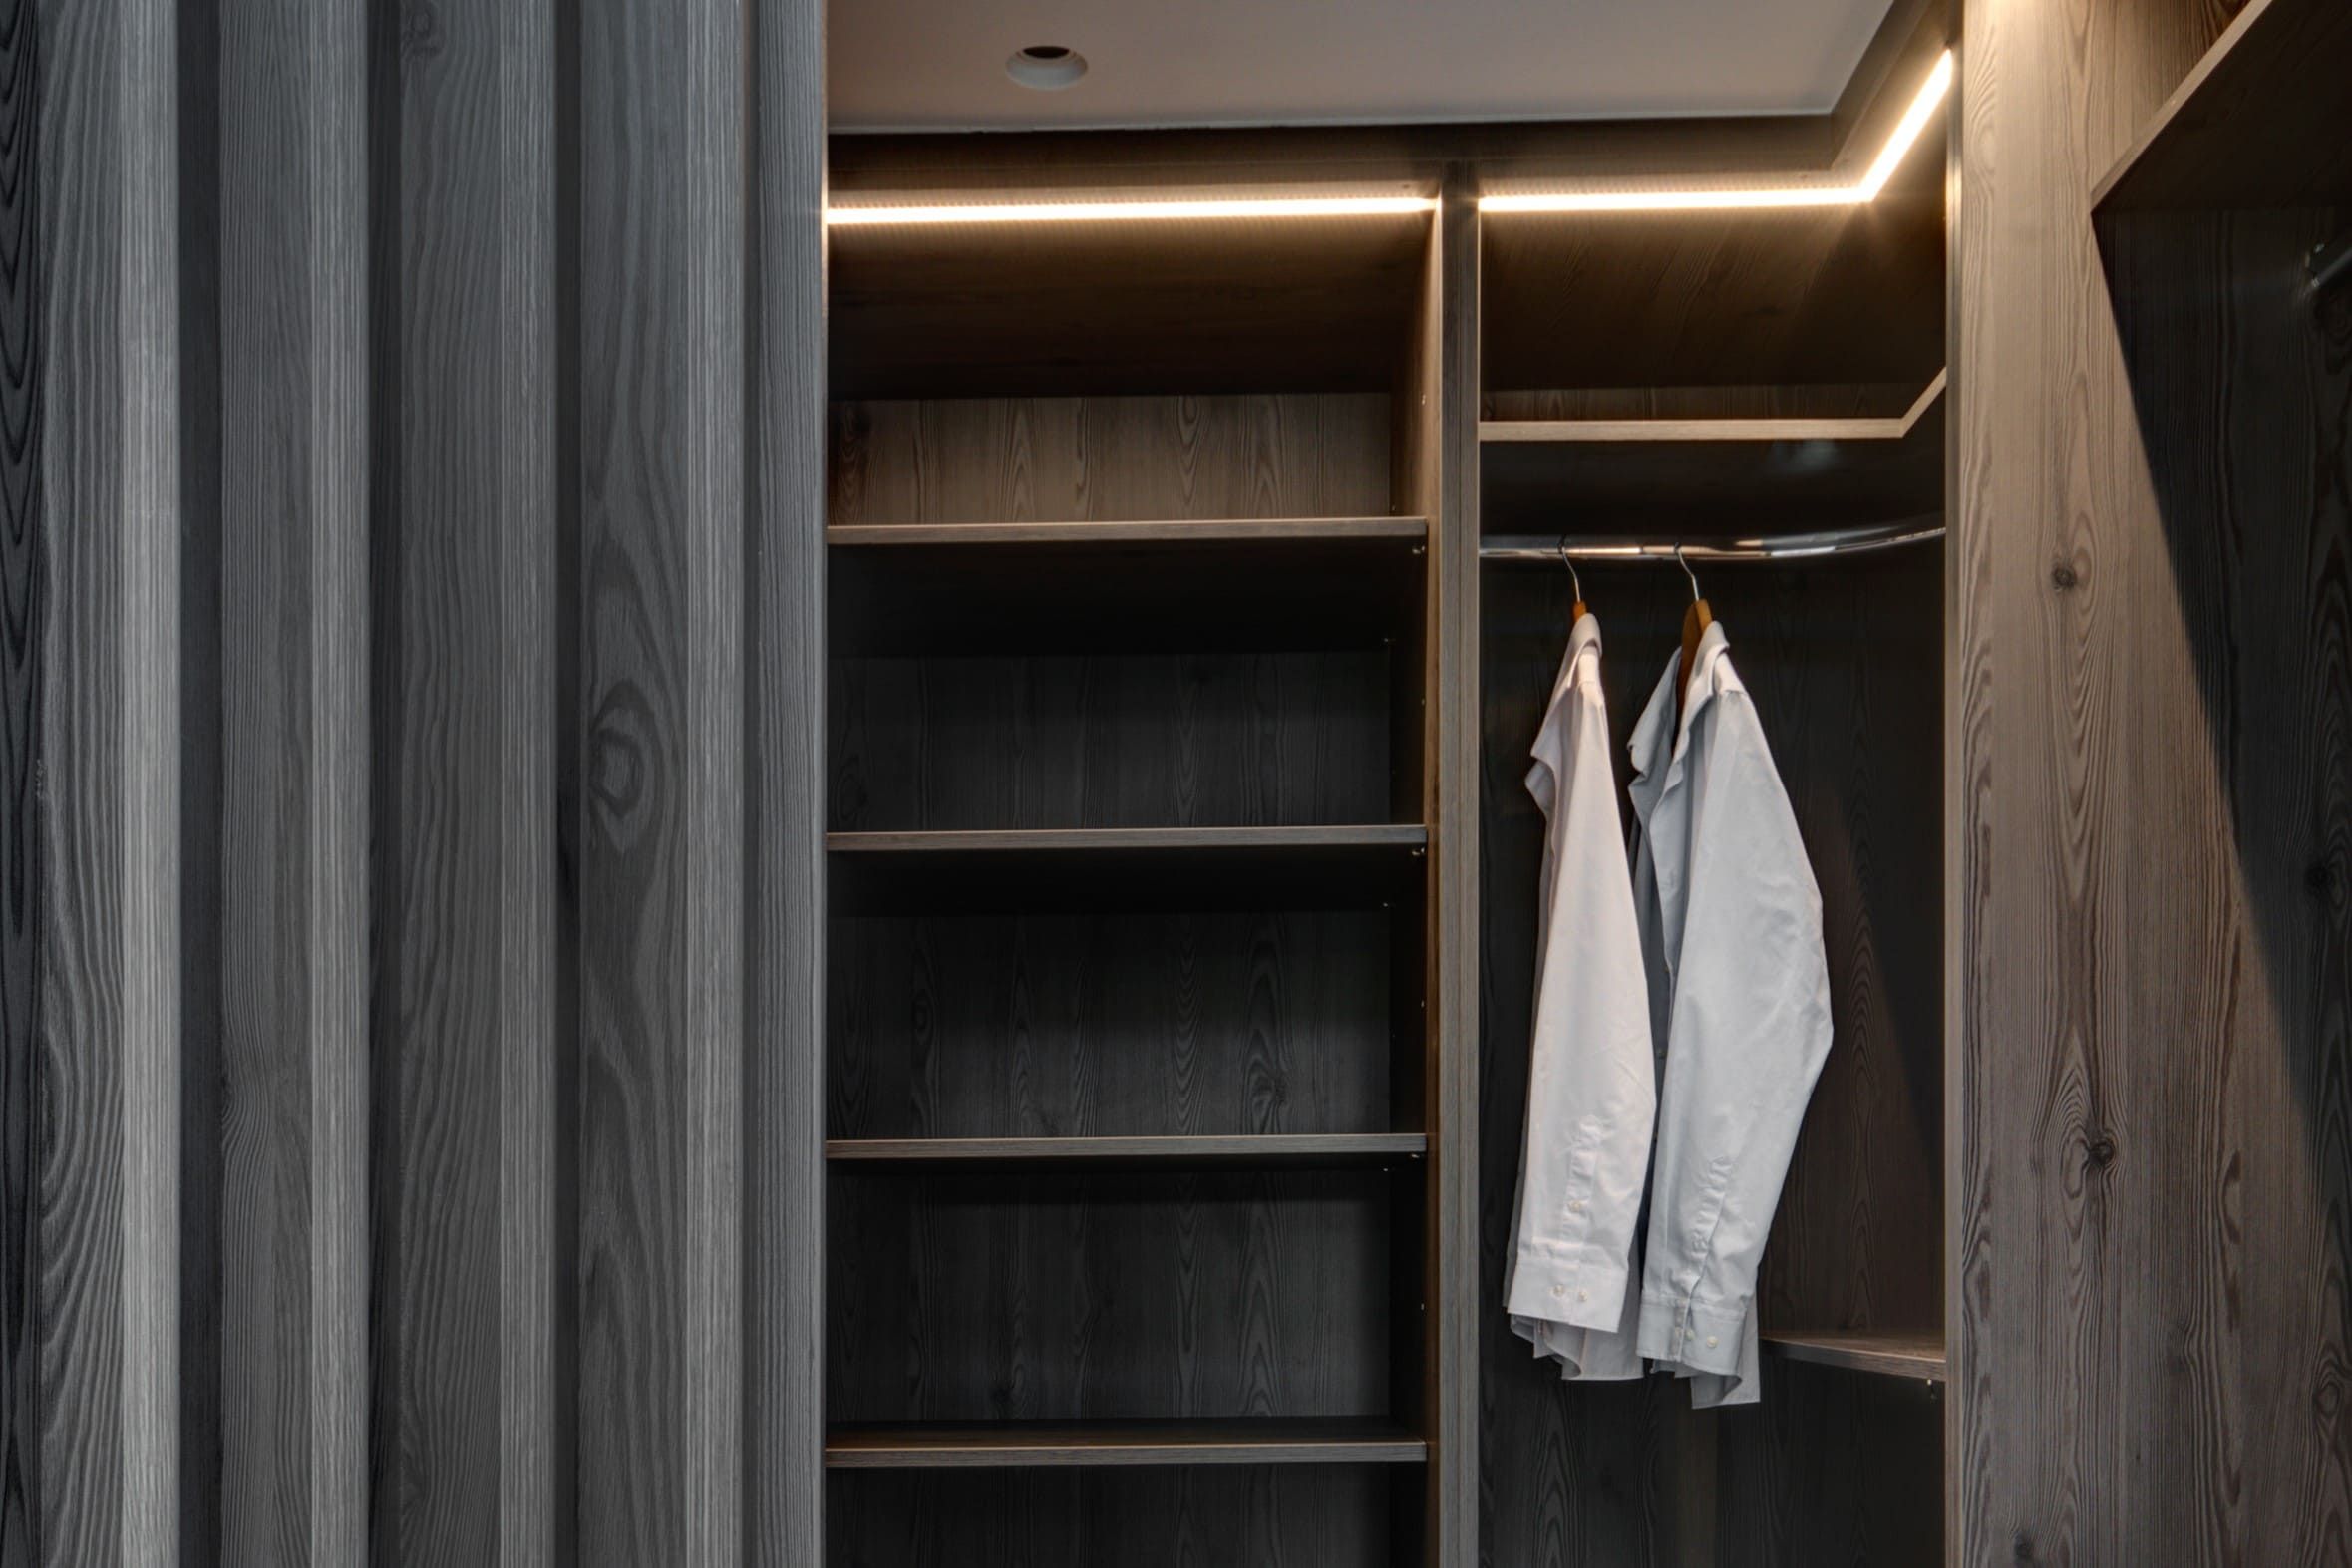 An integrated, walk-in bespoke dressing room. Soft lighting provides a warming tone to the grey wood cabinets.